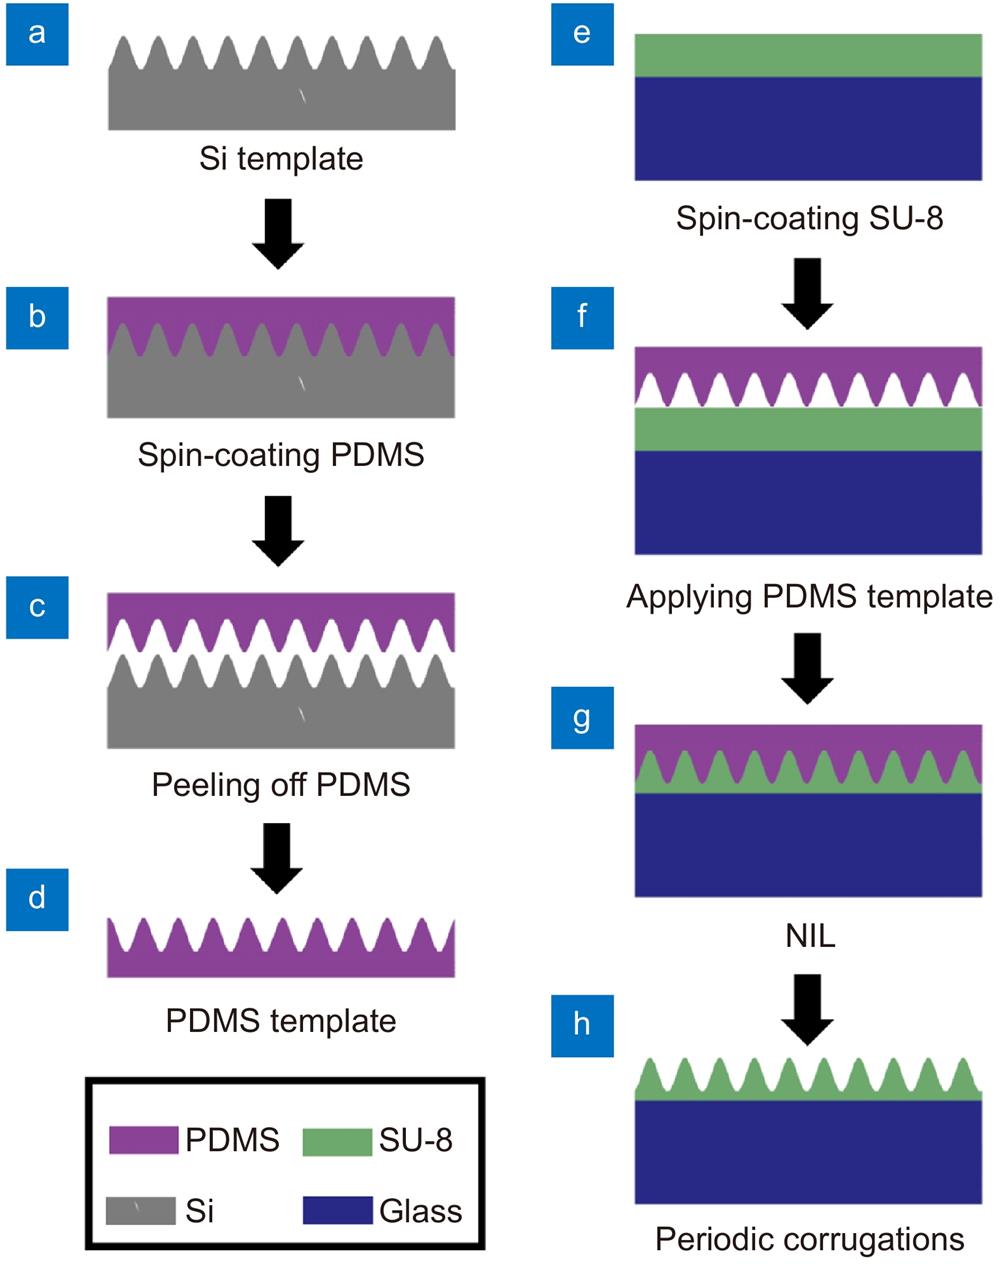 Fabrication process of the periodic corrugations based on NIL. (a) Si template with 290 nm periodic corrugations. (b) PDMS was spin-coated on Si template. (c) Solidified PDMS film was peeled off. (d) The corrugations were transferred to PDMS template. (e) SU-8 was spin-coated on a pre-cleaned glass substrate. (f) Prepared PDMS template was placed on the SU-8 film. (g) NIL processes were applied. (h) The periodic corrugations were prepared on the substrate.